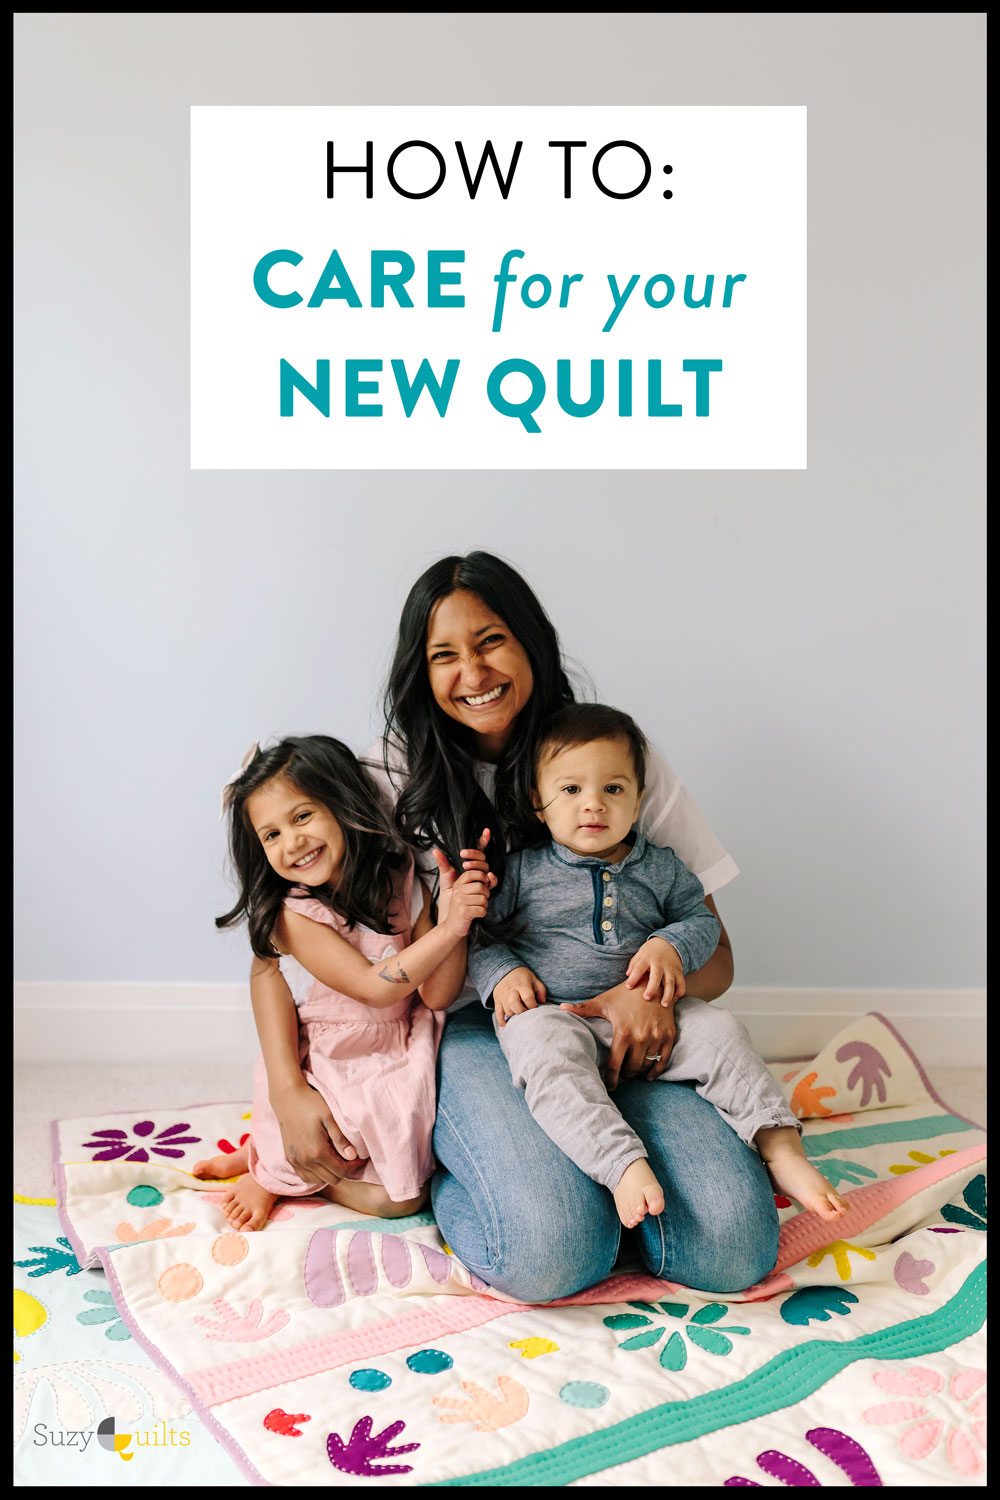 Step by step how to care for a new quilt. Are you giving a quilt away? Easy instructions and a printable card on how to wash and care for a vintage and new quilt.